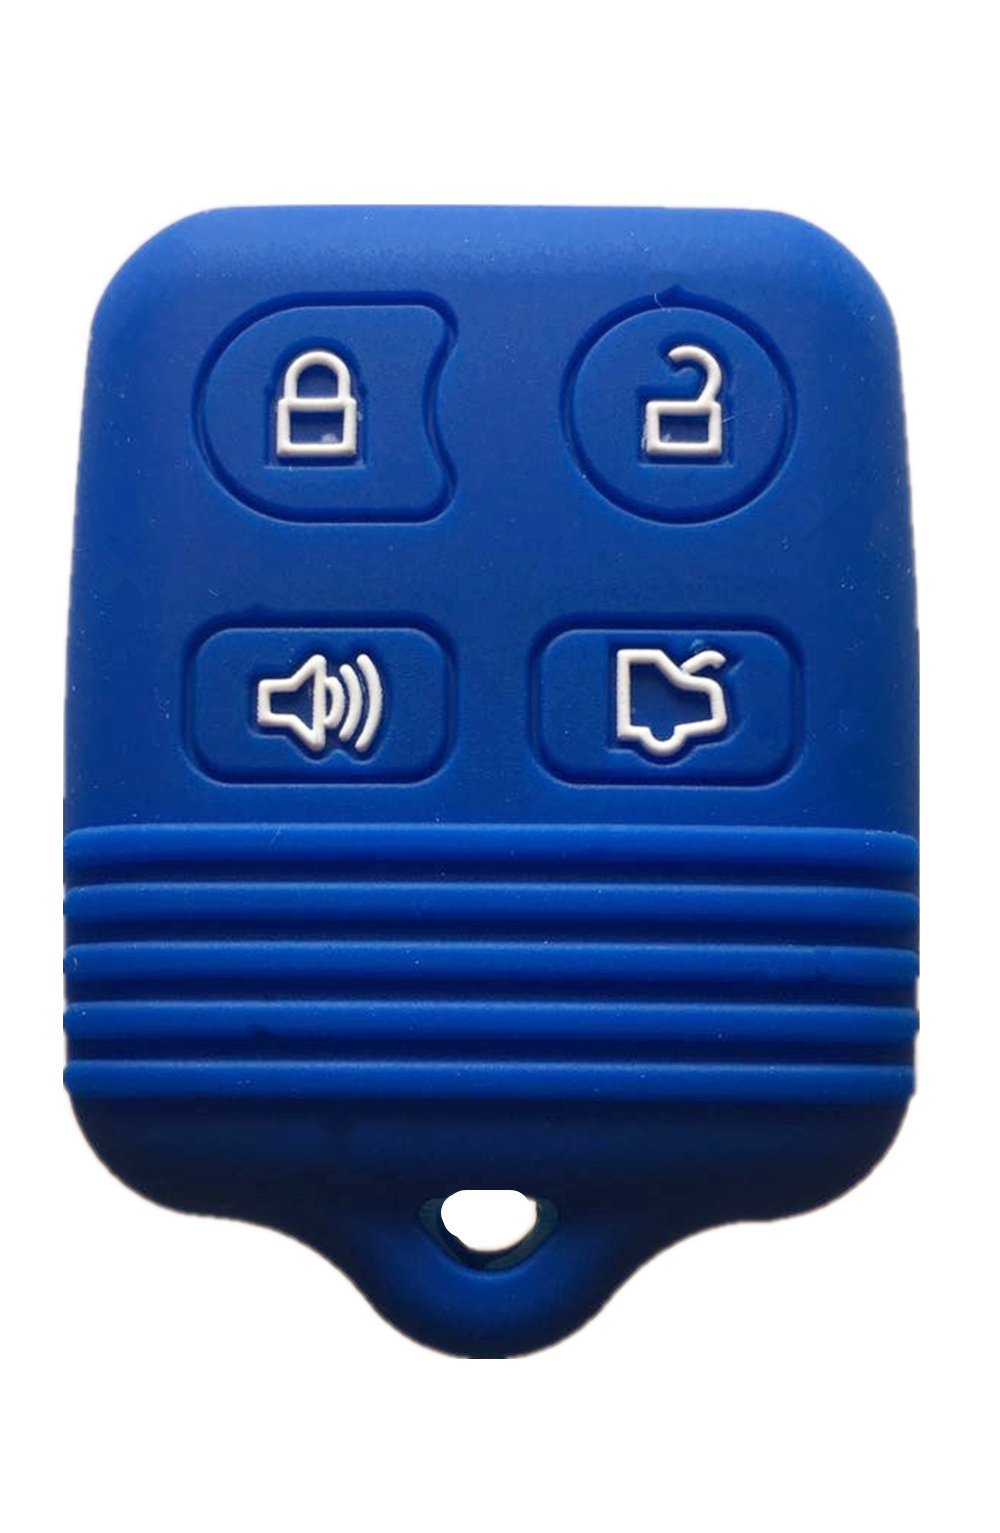  [AUSTRALIA] - Rpkey Silicone Keyless Entry Remote Control Key Fob Cover Case protector For Ford Mustang Edge Escape Expedition Explorer Focus Escort Lincoln Mercury CWTWB1U331 GQ43VT11T 8S4Z-15K601-AA 5925872